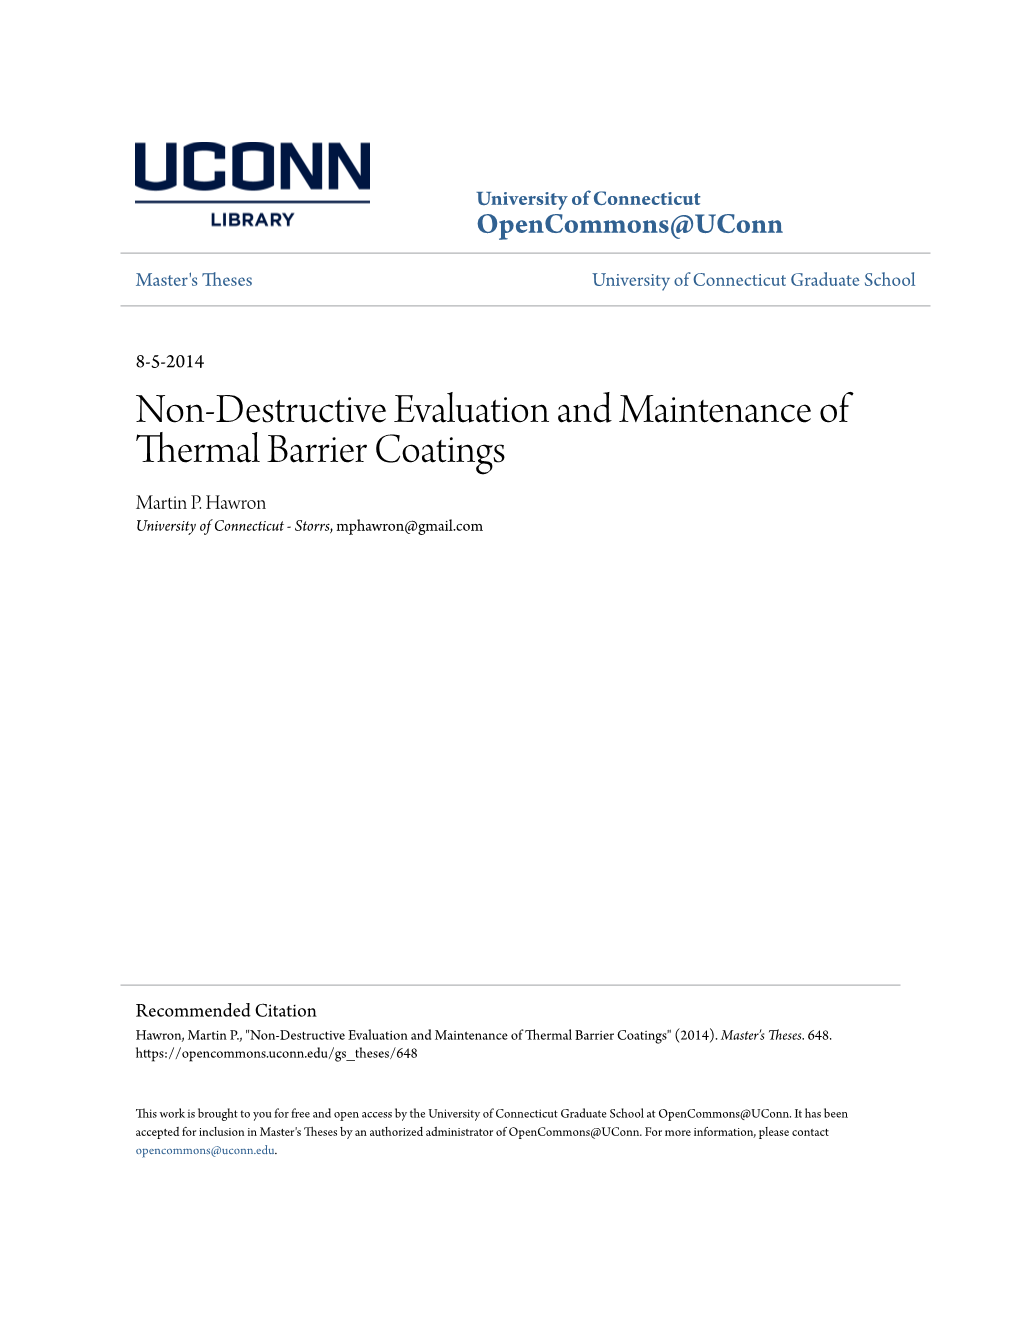 Non-Destructive Evaluation and Maintenance of Thermal Barrier Coatings Martin P